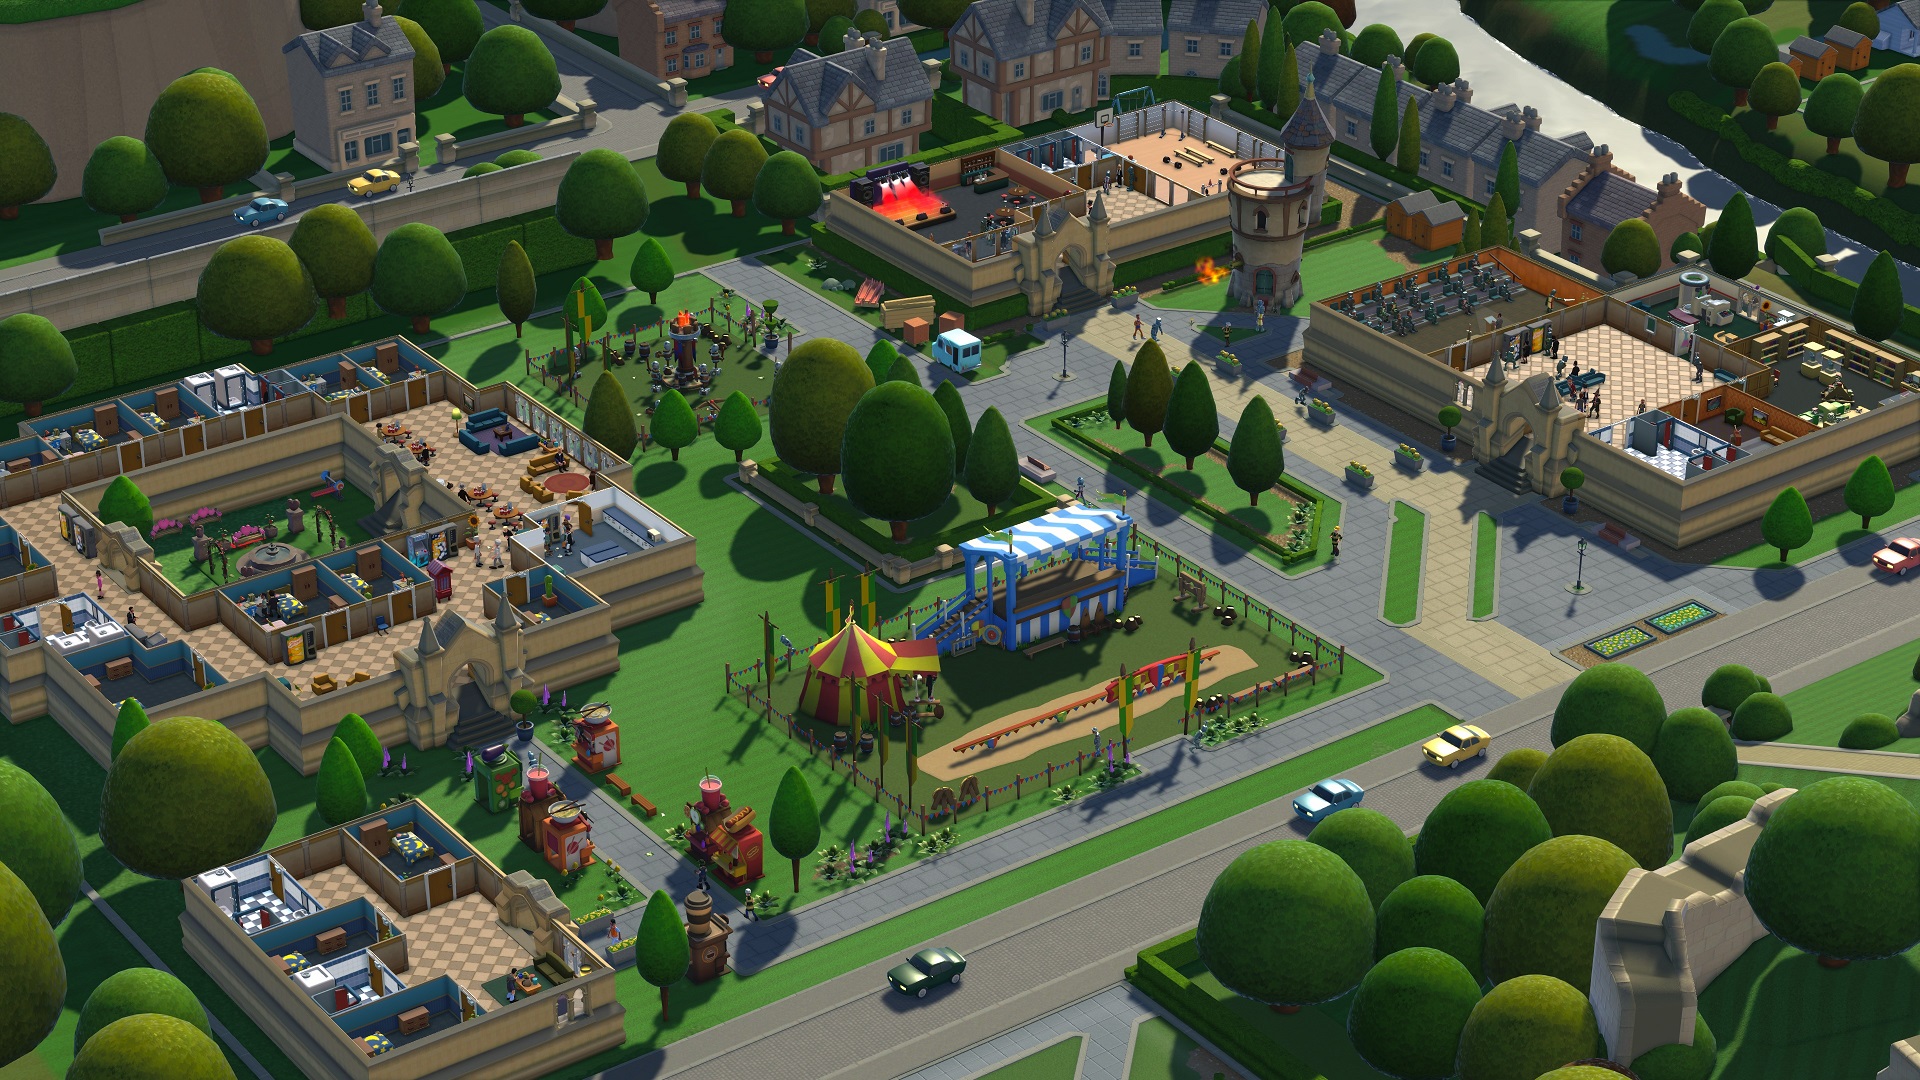 Build a wacky university in Two Point Campus, from the developers of Two Point Hospital